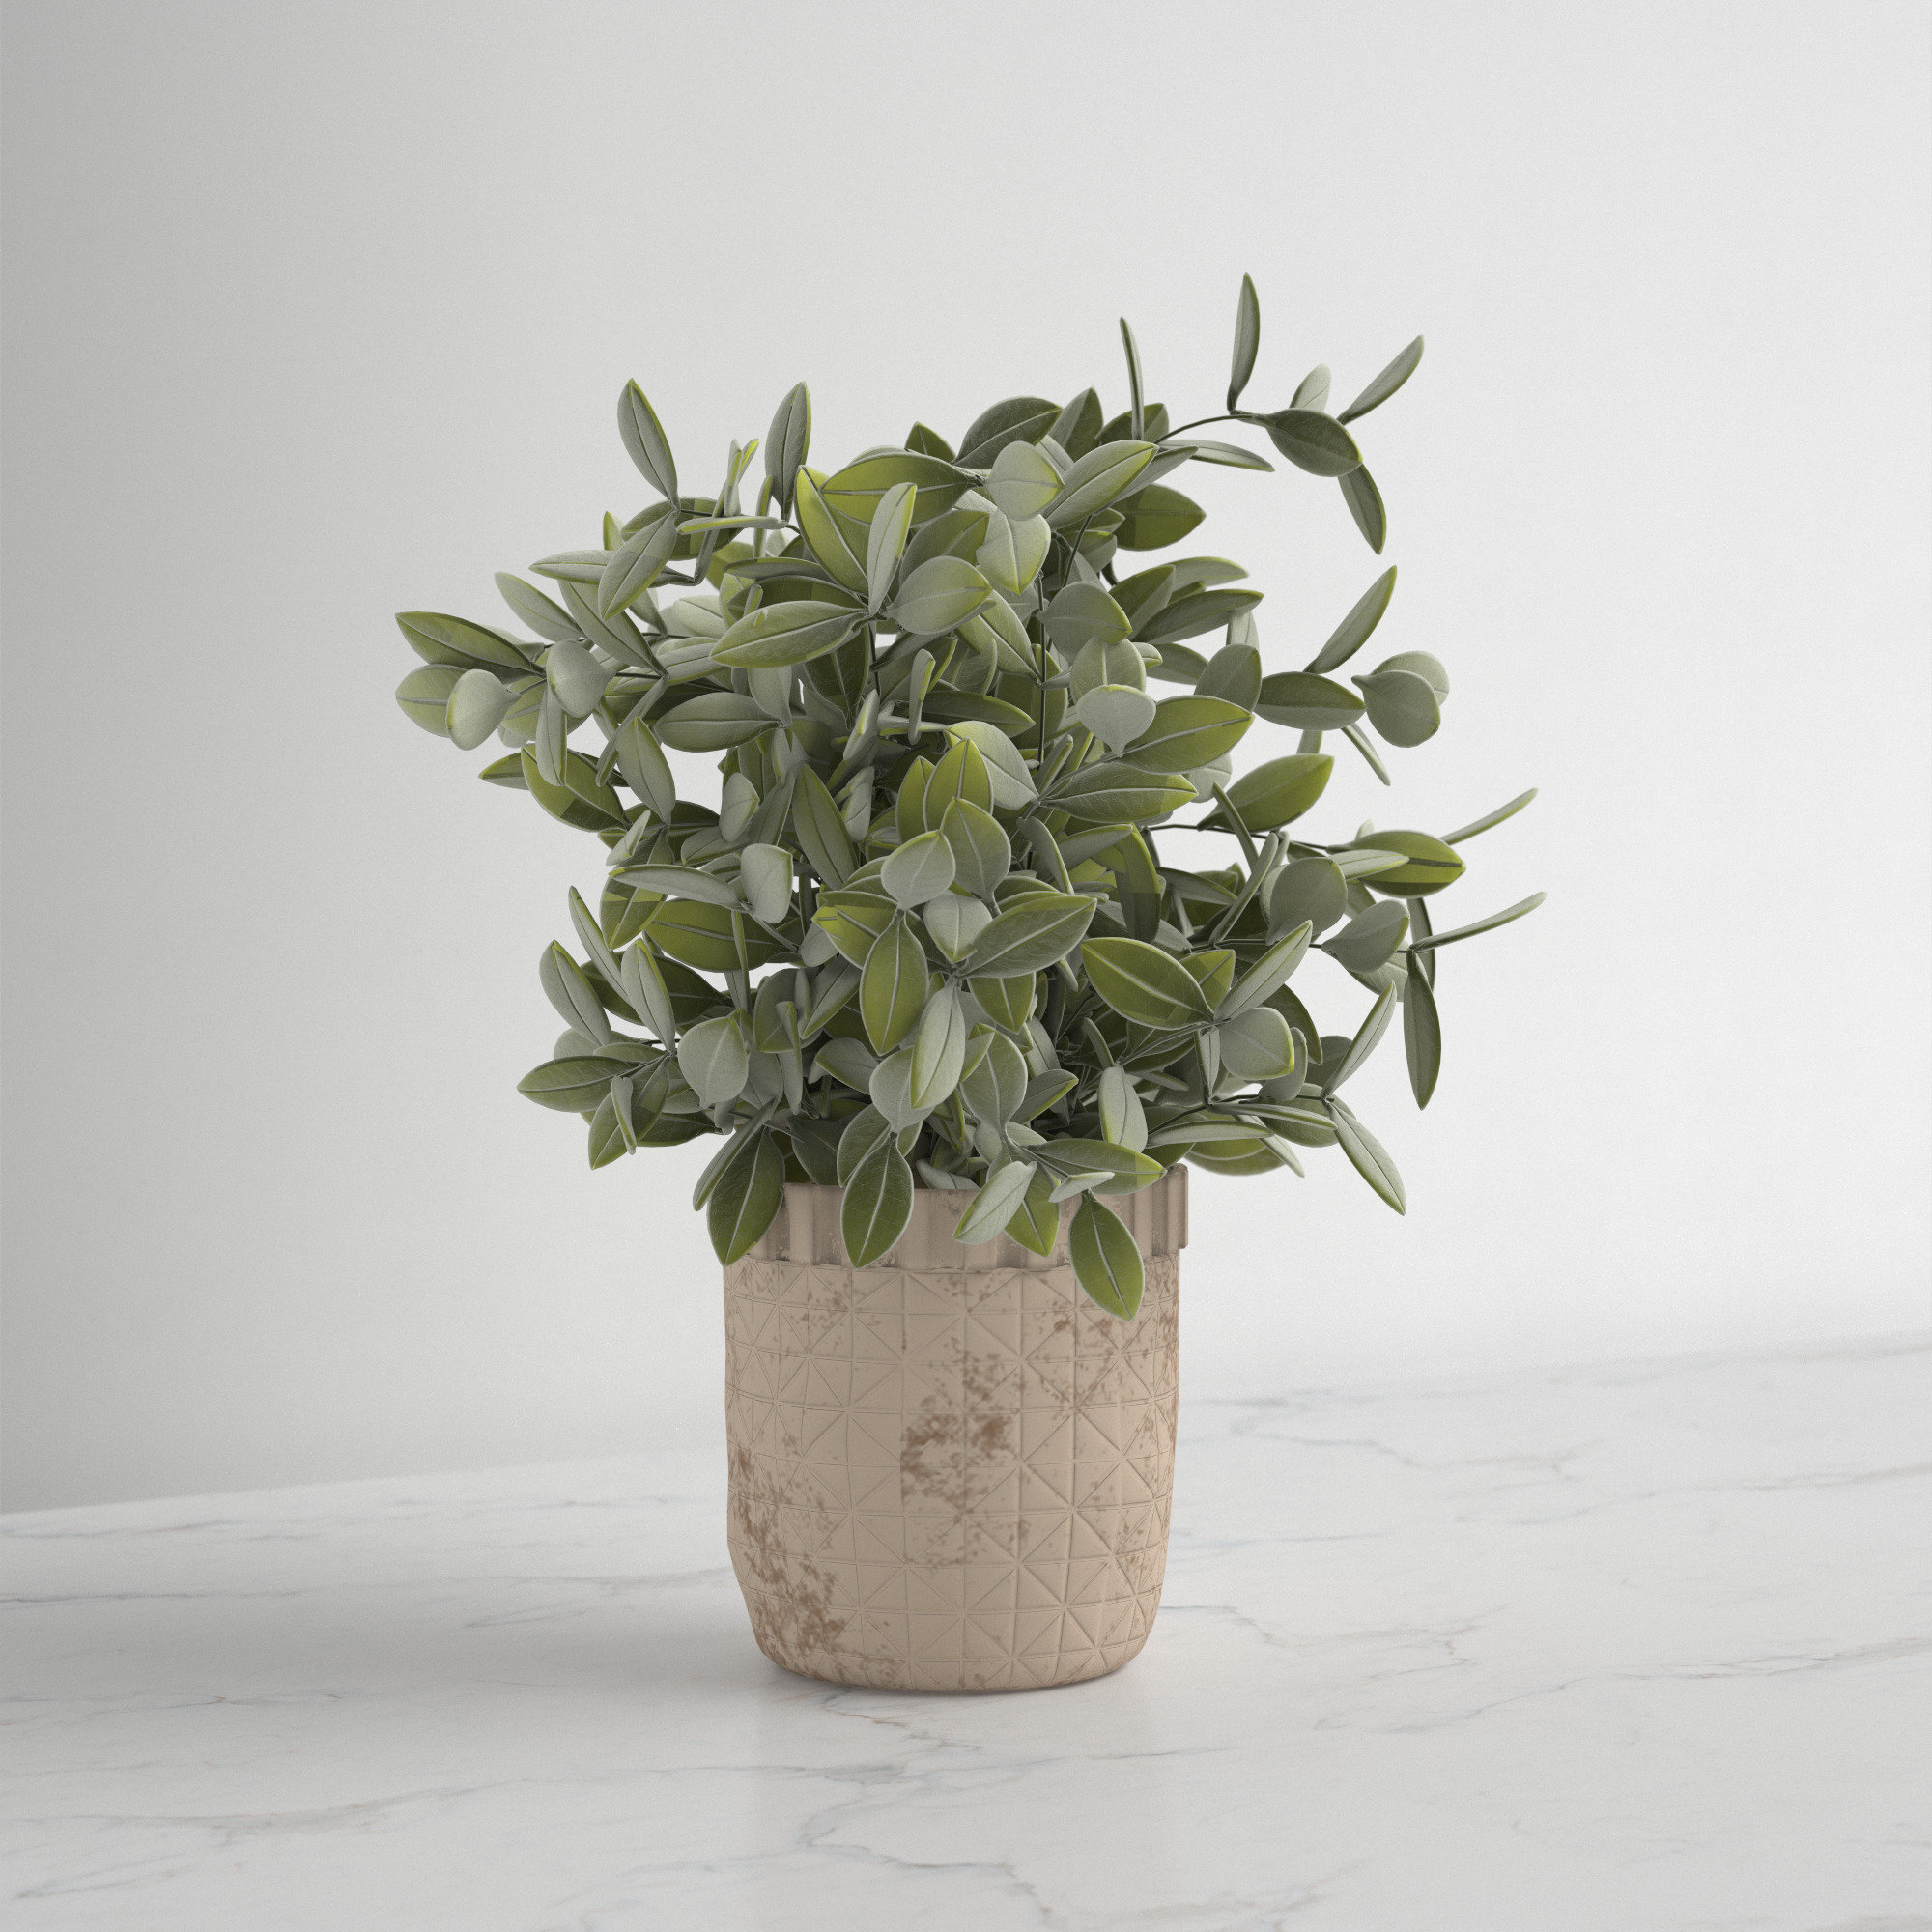 Light Green Faux Trailing Spanish Moss Artificial Fake Succulent Plant